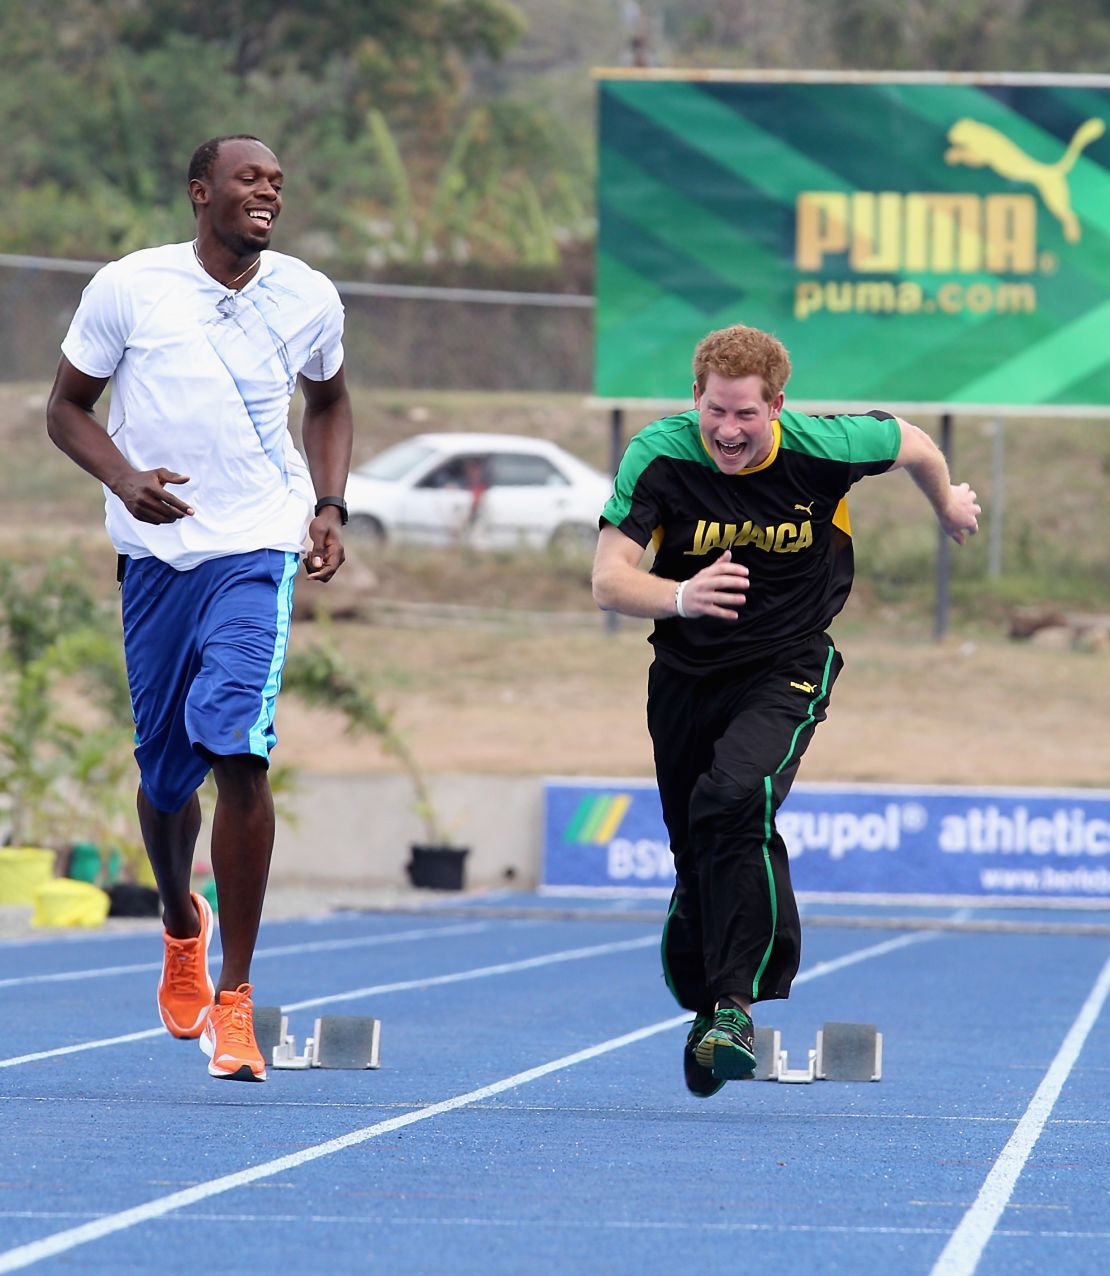 "There's always the unexpected with Harry," says Larcombe, recalling a trip to Jamaica in 2012 when the prince challenged sprinter Usain Bolt to a race. "Nobody knew he was going to do that."